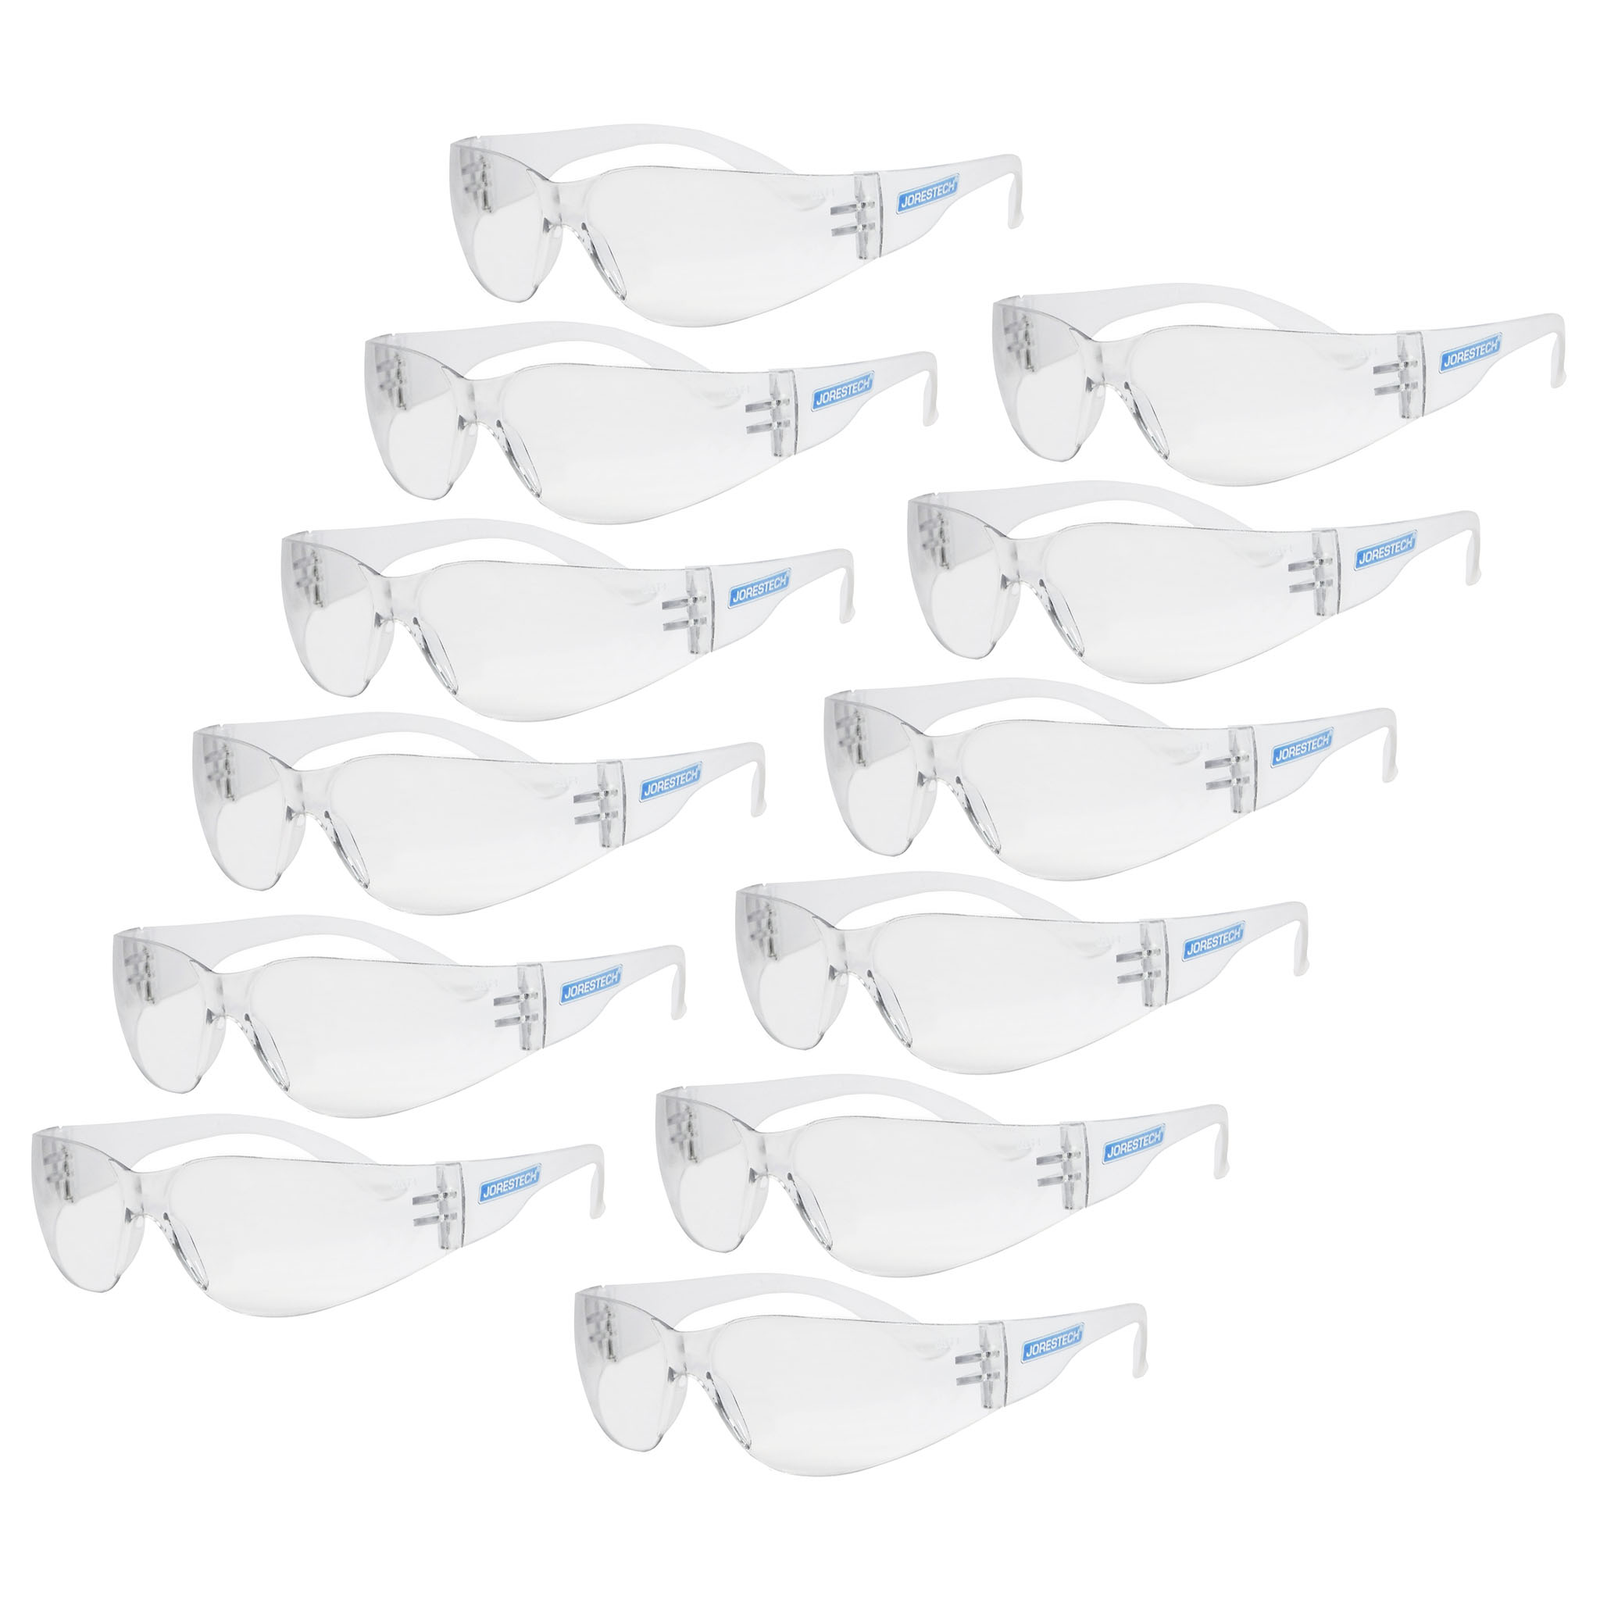 Pack of 12 clear JORESTECH Safety High Impact ANSI compliant glasses. 